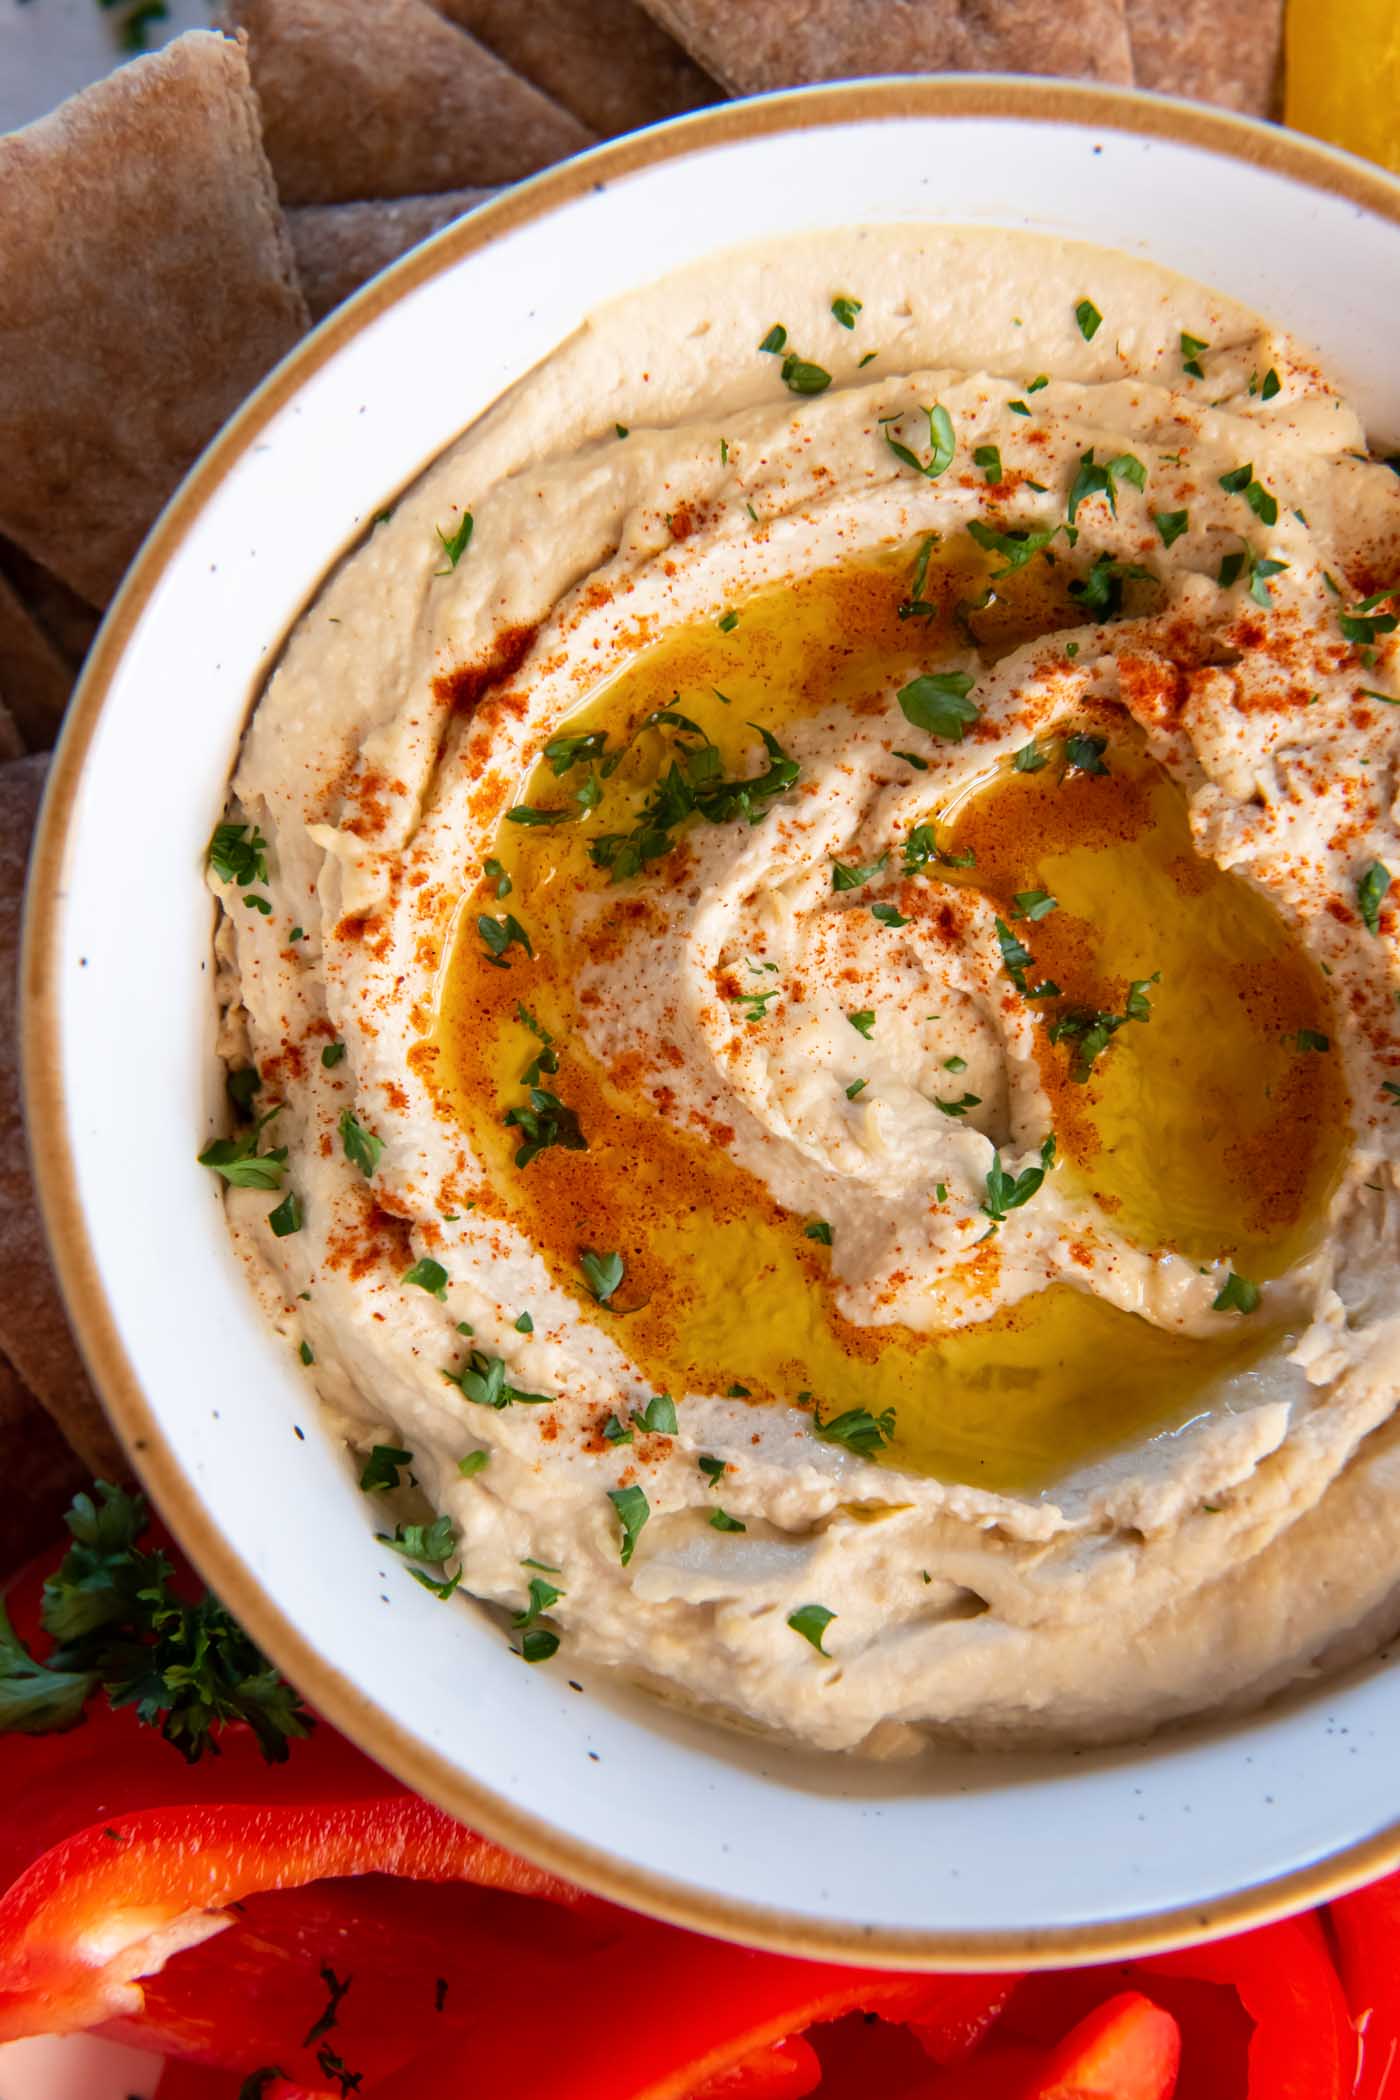 Hummus served in a bowl, garnished with olive oil, paprika and fresh parsley.